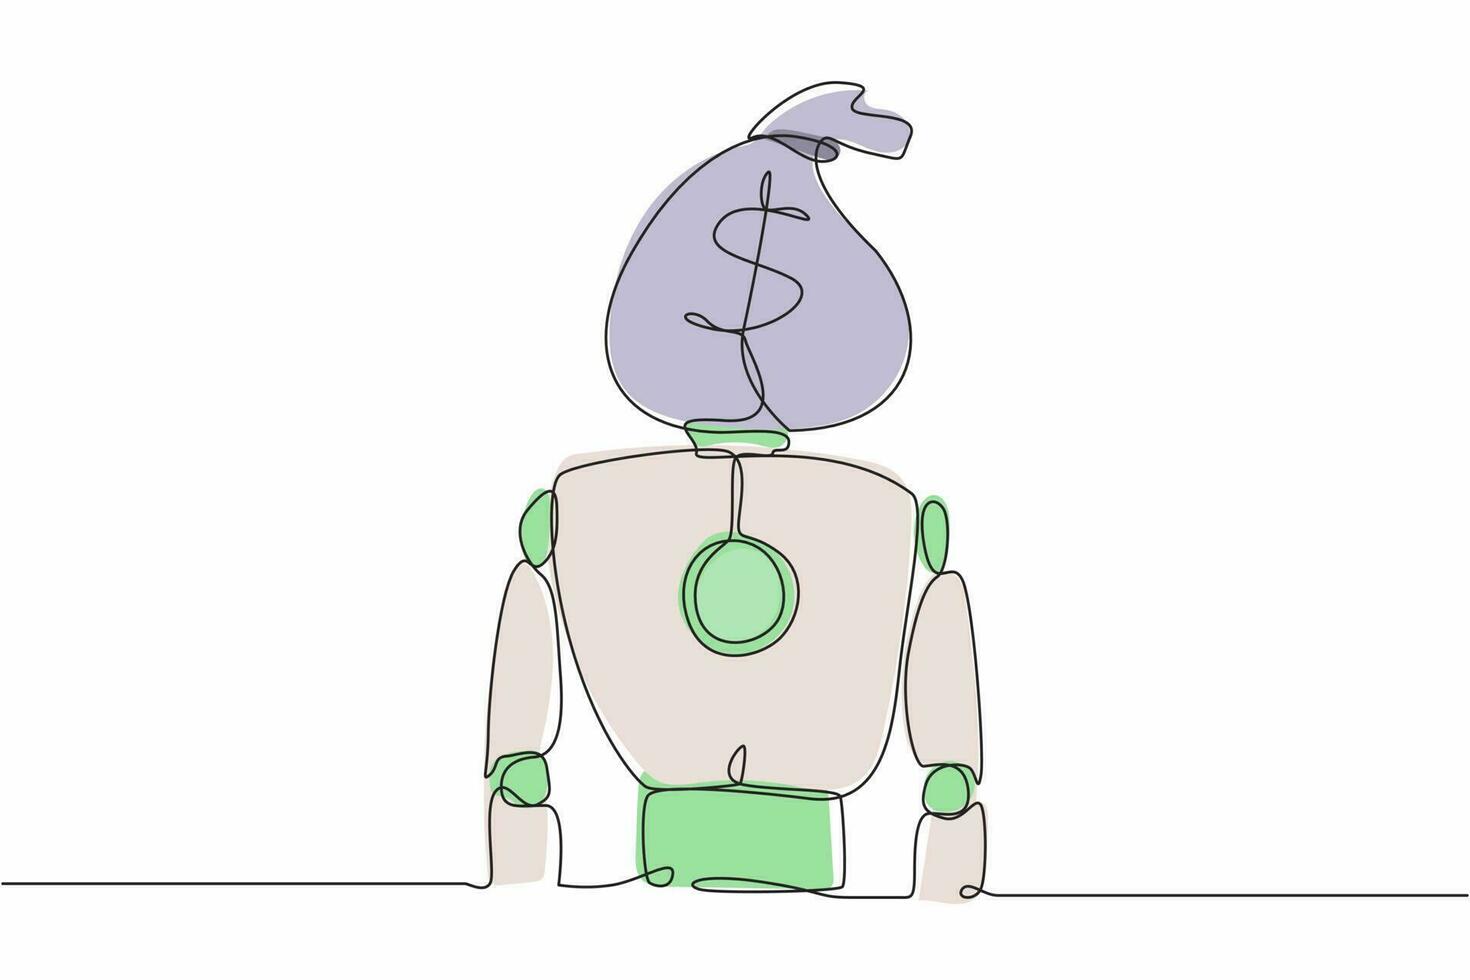 Single one line drawing robot with money bag instead of head. Future technology development. Artificial intelligence and machine learning process. Continuous line design graphic vector illustration